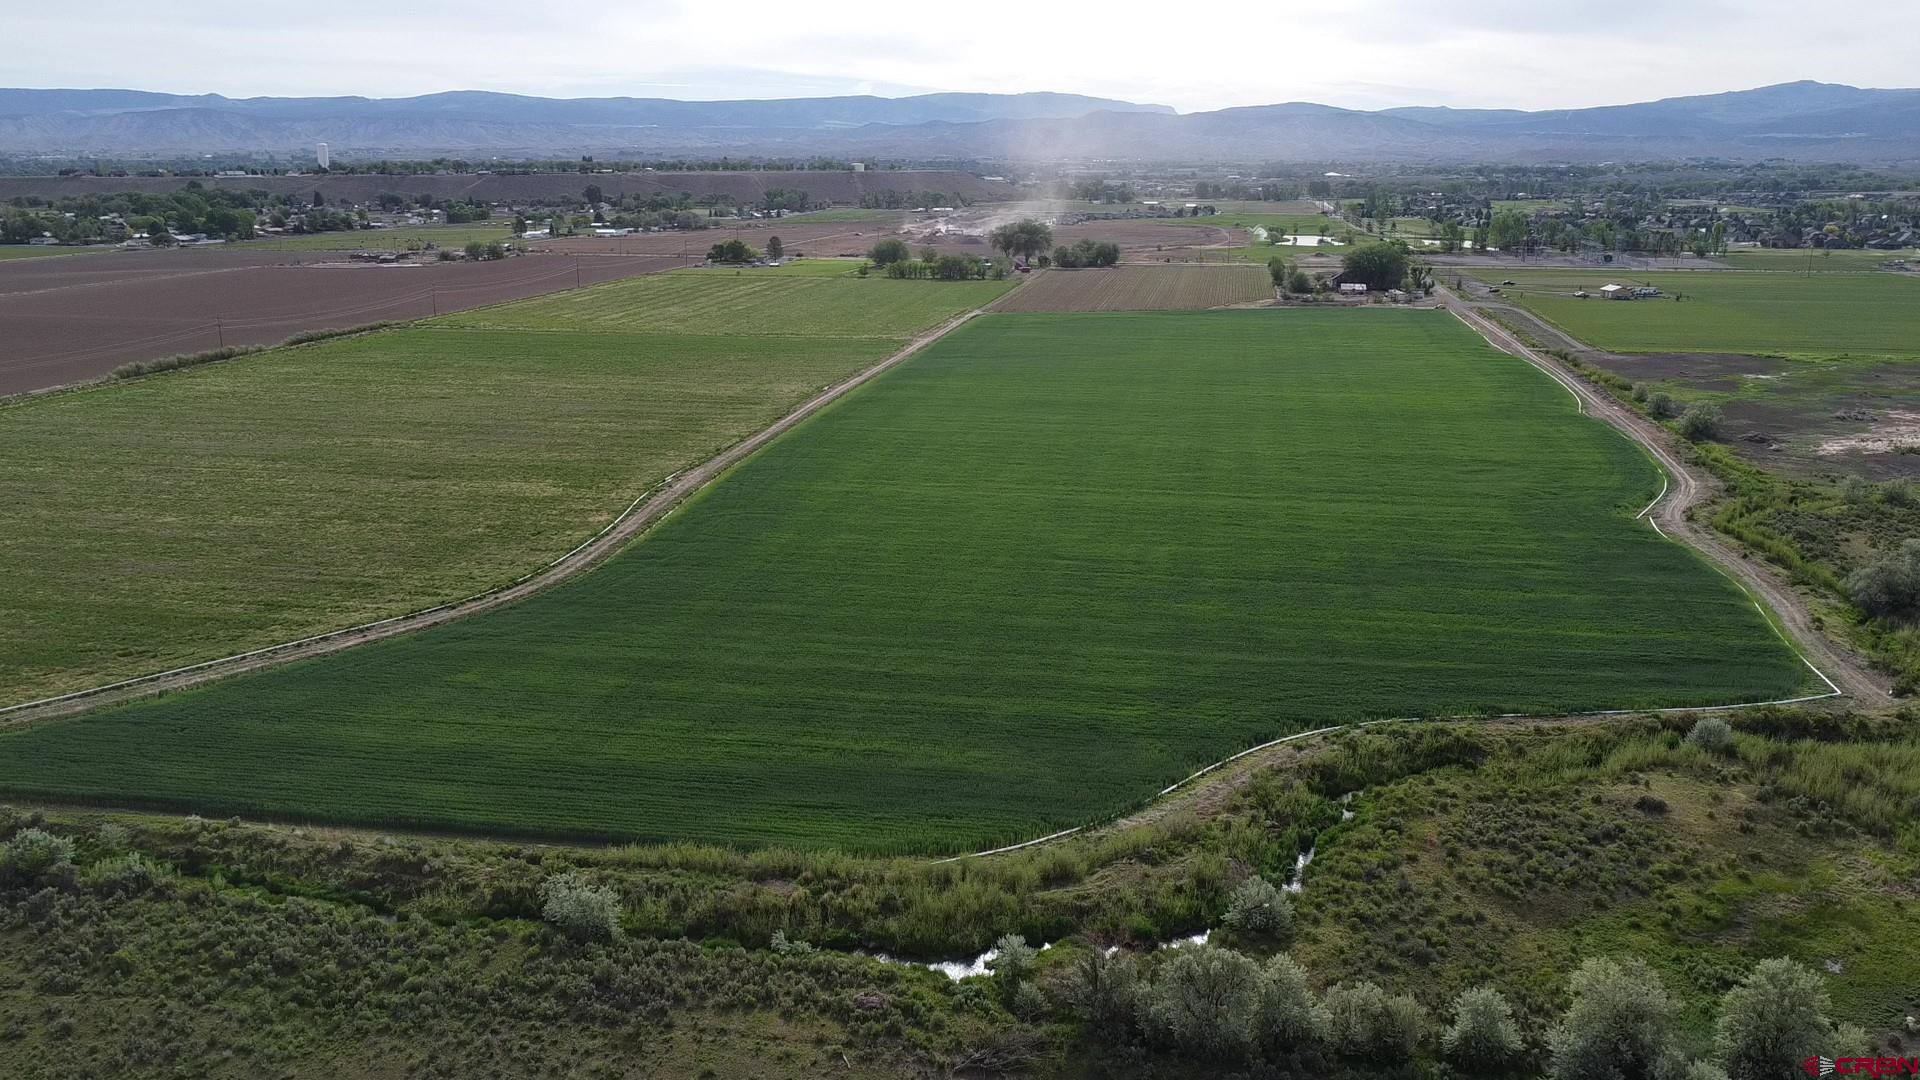 Got some cash to wisely invest in one of America's best communities? Looking for some of the highest quality irrigation water anywhere? Really want mountain views? How 'bout live water? Ready to move to a lower elevation where you can breathe, bring your animals and access shopping and an airport easily? Then it's time to come and see this 68.8 acre parcel, which touches the Cobble Creek Golf Course on the SW edge of town. While it has been labeled Montrose Colorado's most significant future development parcels, it can serve so many needs. It's currently still in the County, but could easily be annexed into the City. The land is leased by a wonderful, reliable Ag tenant who lovingly cares for the land- maintaining the super low Ag taxes. This status can remain as long as you'd like-making the property the perfect buy and hold, 1031 Exchange, or to sit on while you figure out what to do! The views are great, and the access to water from (the real)Cobble Creek, Happy Canyon Creek and Uncompahgre Valley Water Users irrigation water add important future options for developers as well as farmers/ranchers and homeowners. You can't beat the NRCS irrigation system-installed just a few years back-making the watering system efficient and problem-free. The property is already in two legal parcels, but can be subdivided without going through the full subdivision process. Too big? Buy it all-sell off what you don't want over time, and get the land for your future mini-ranch for free! Great access off of 6400 Road-the paved road leading north/south on the west side of Cobble Creek, as well as Orange Road along its southern boundary. Call agent and Montrose County for additional ideas. This is the Real Deal!! Note:  Seller is willing to carry at terms that are a win for everyone.